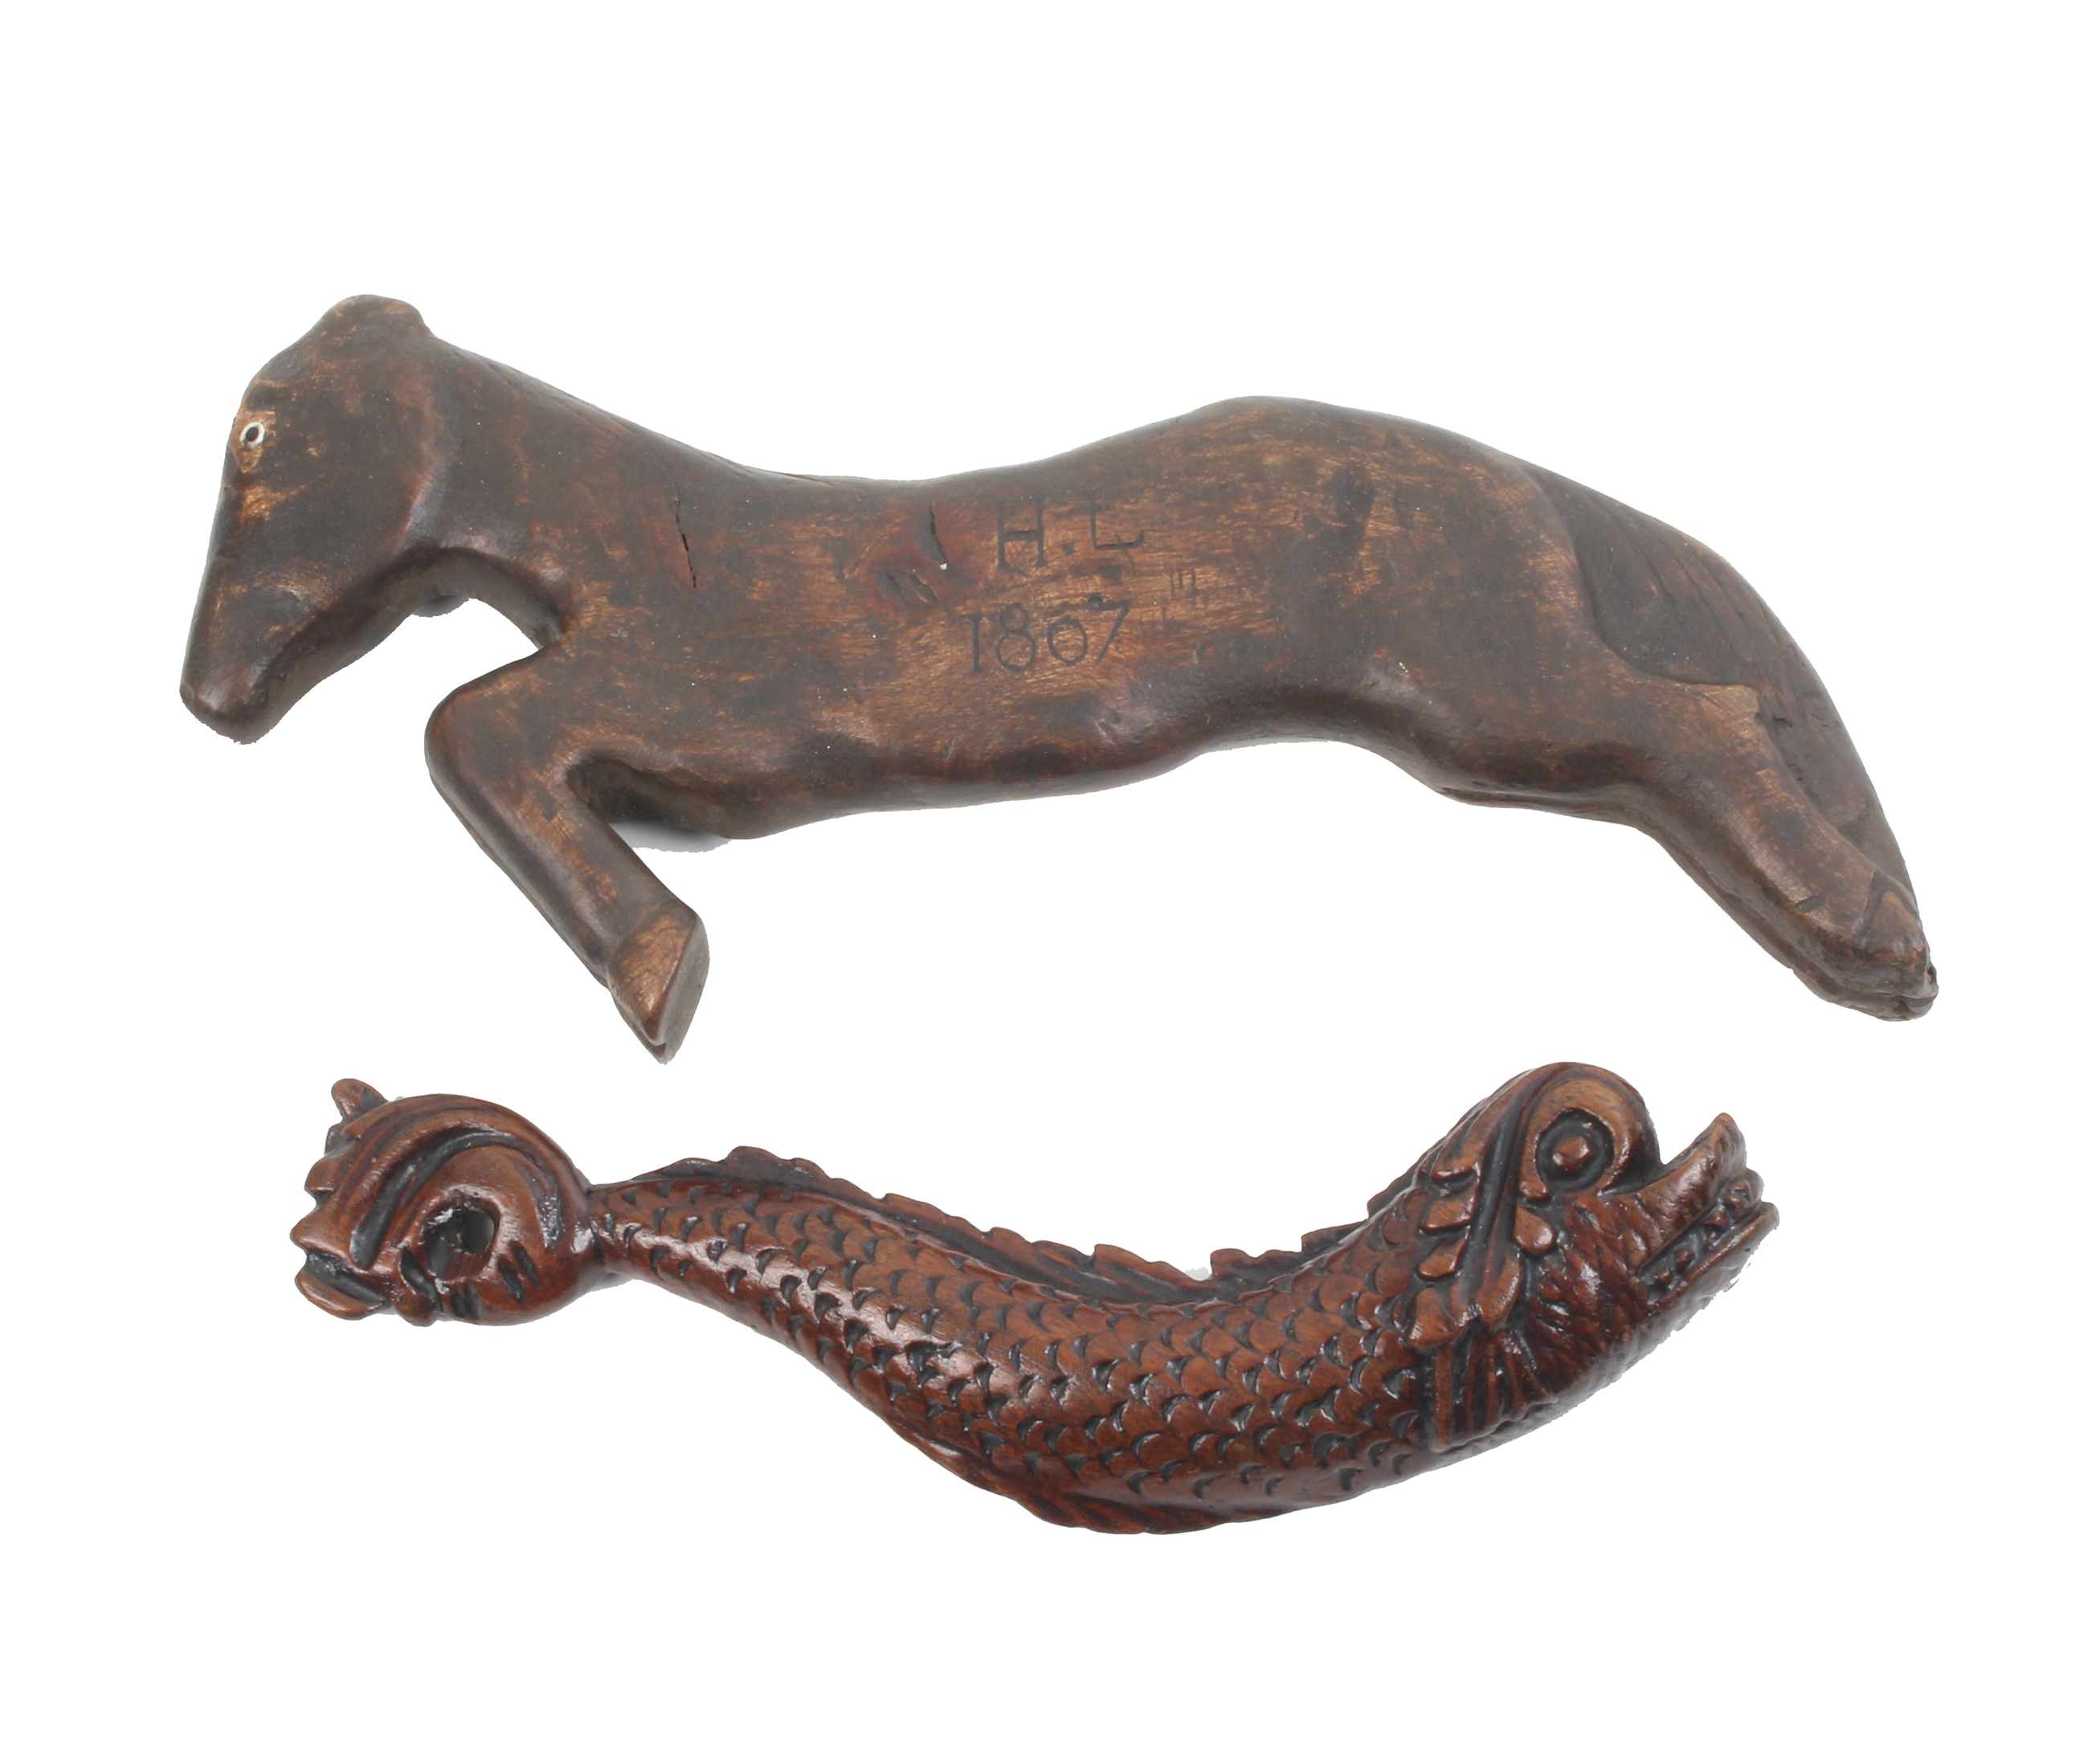 Two carved wooden figural knitting sticks, 19th Century comprising an example carved as a dolphin